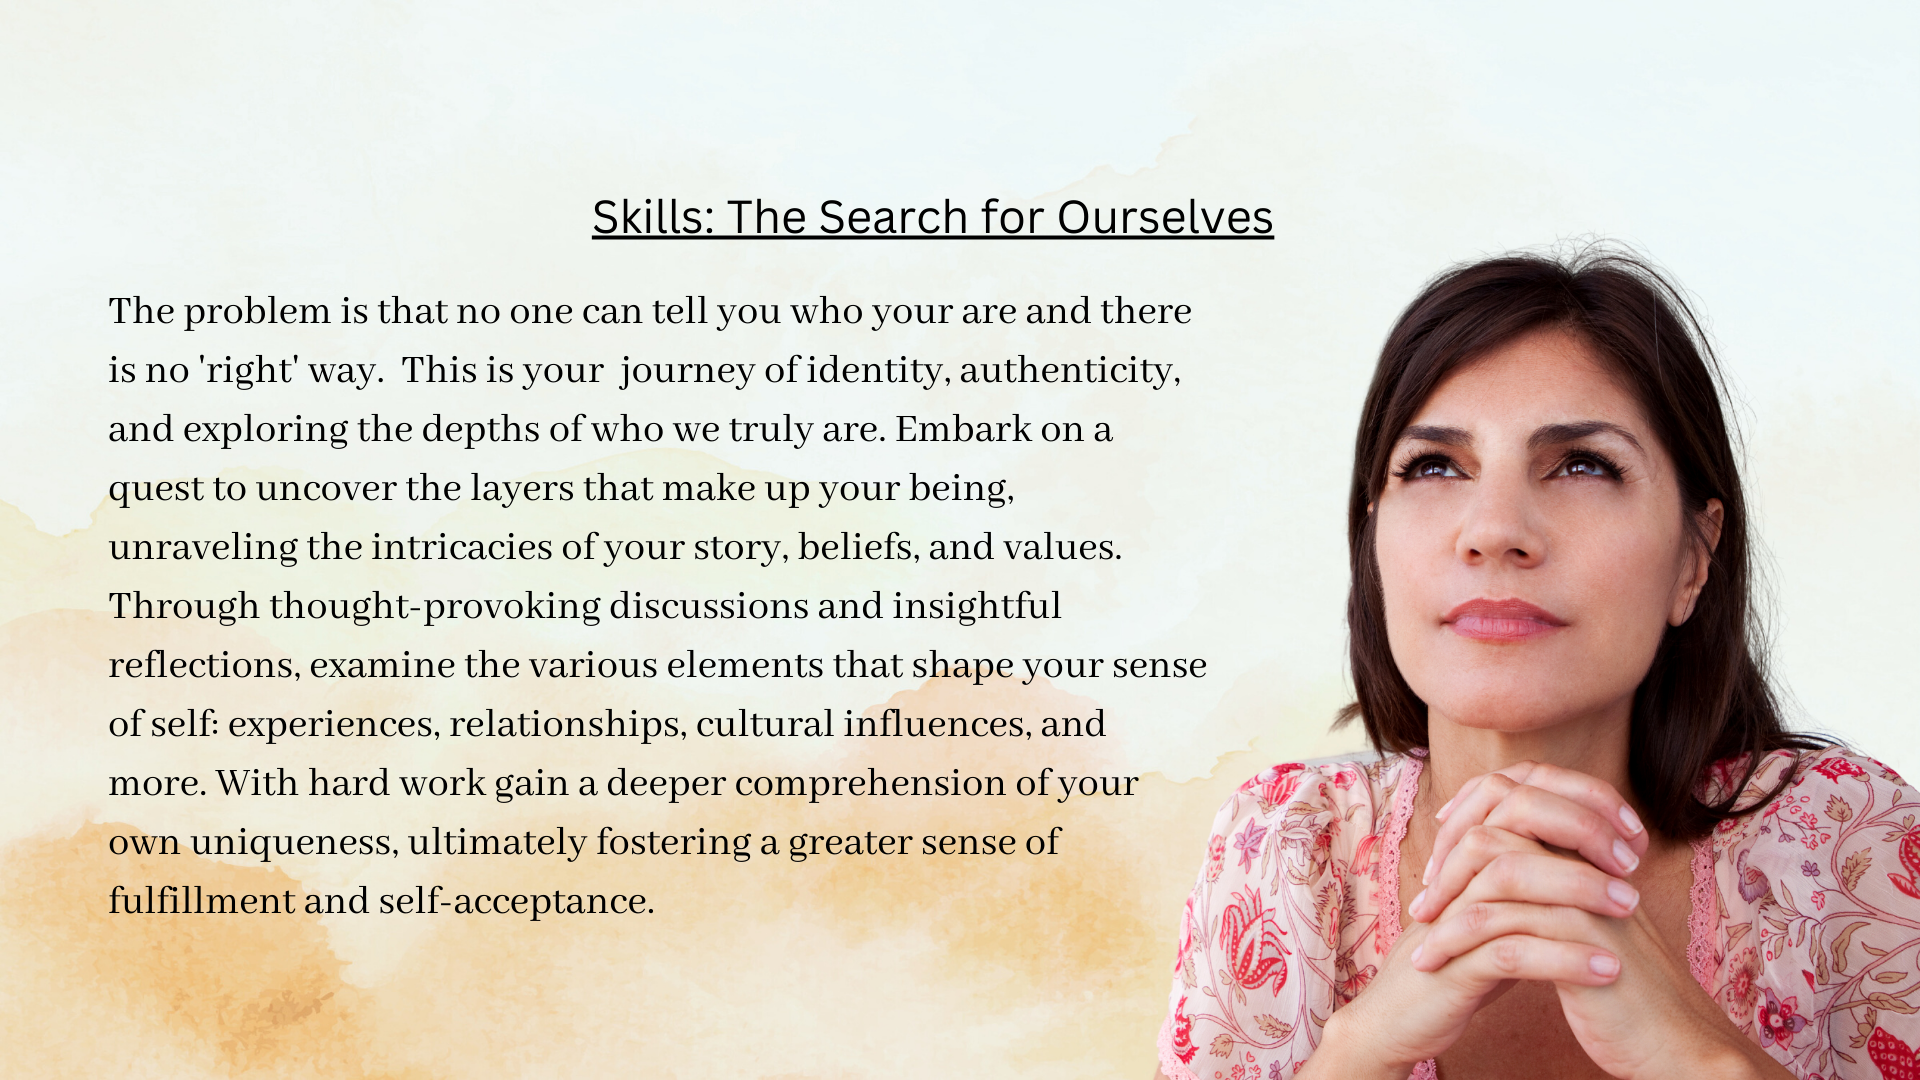 Skills: The Search for Ourselves